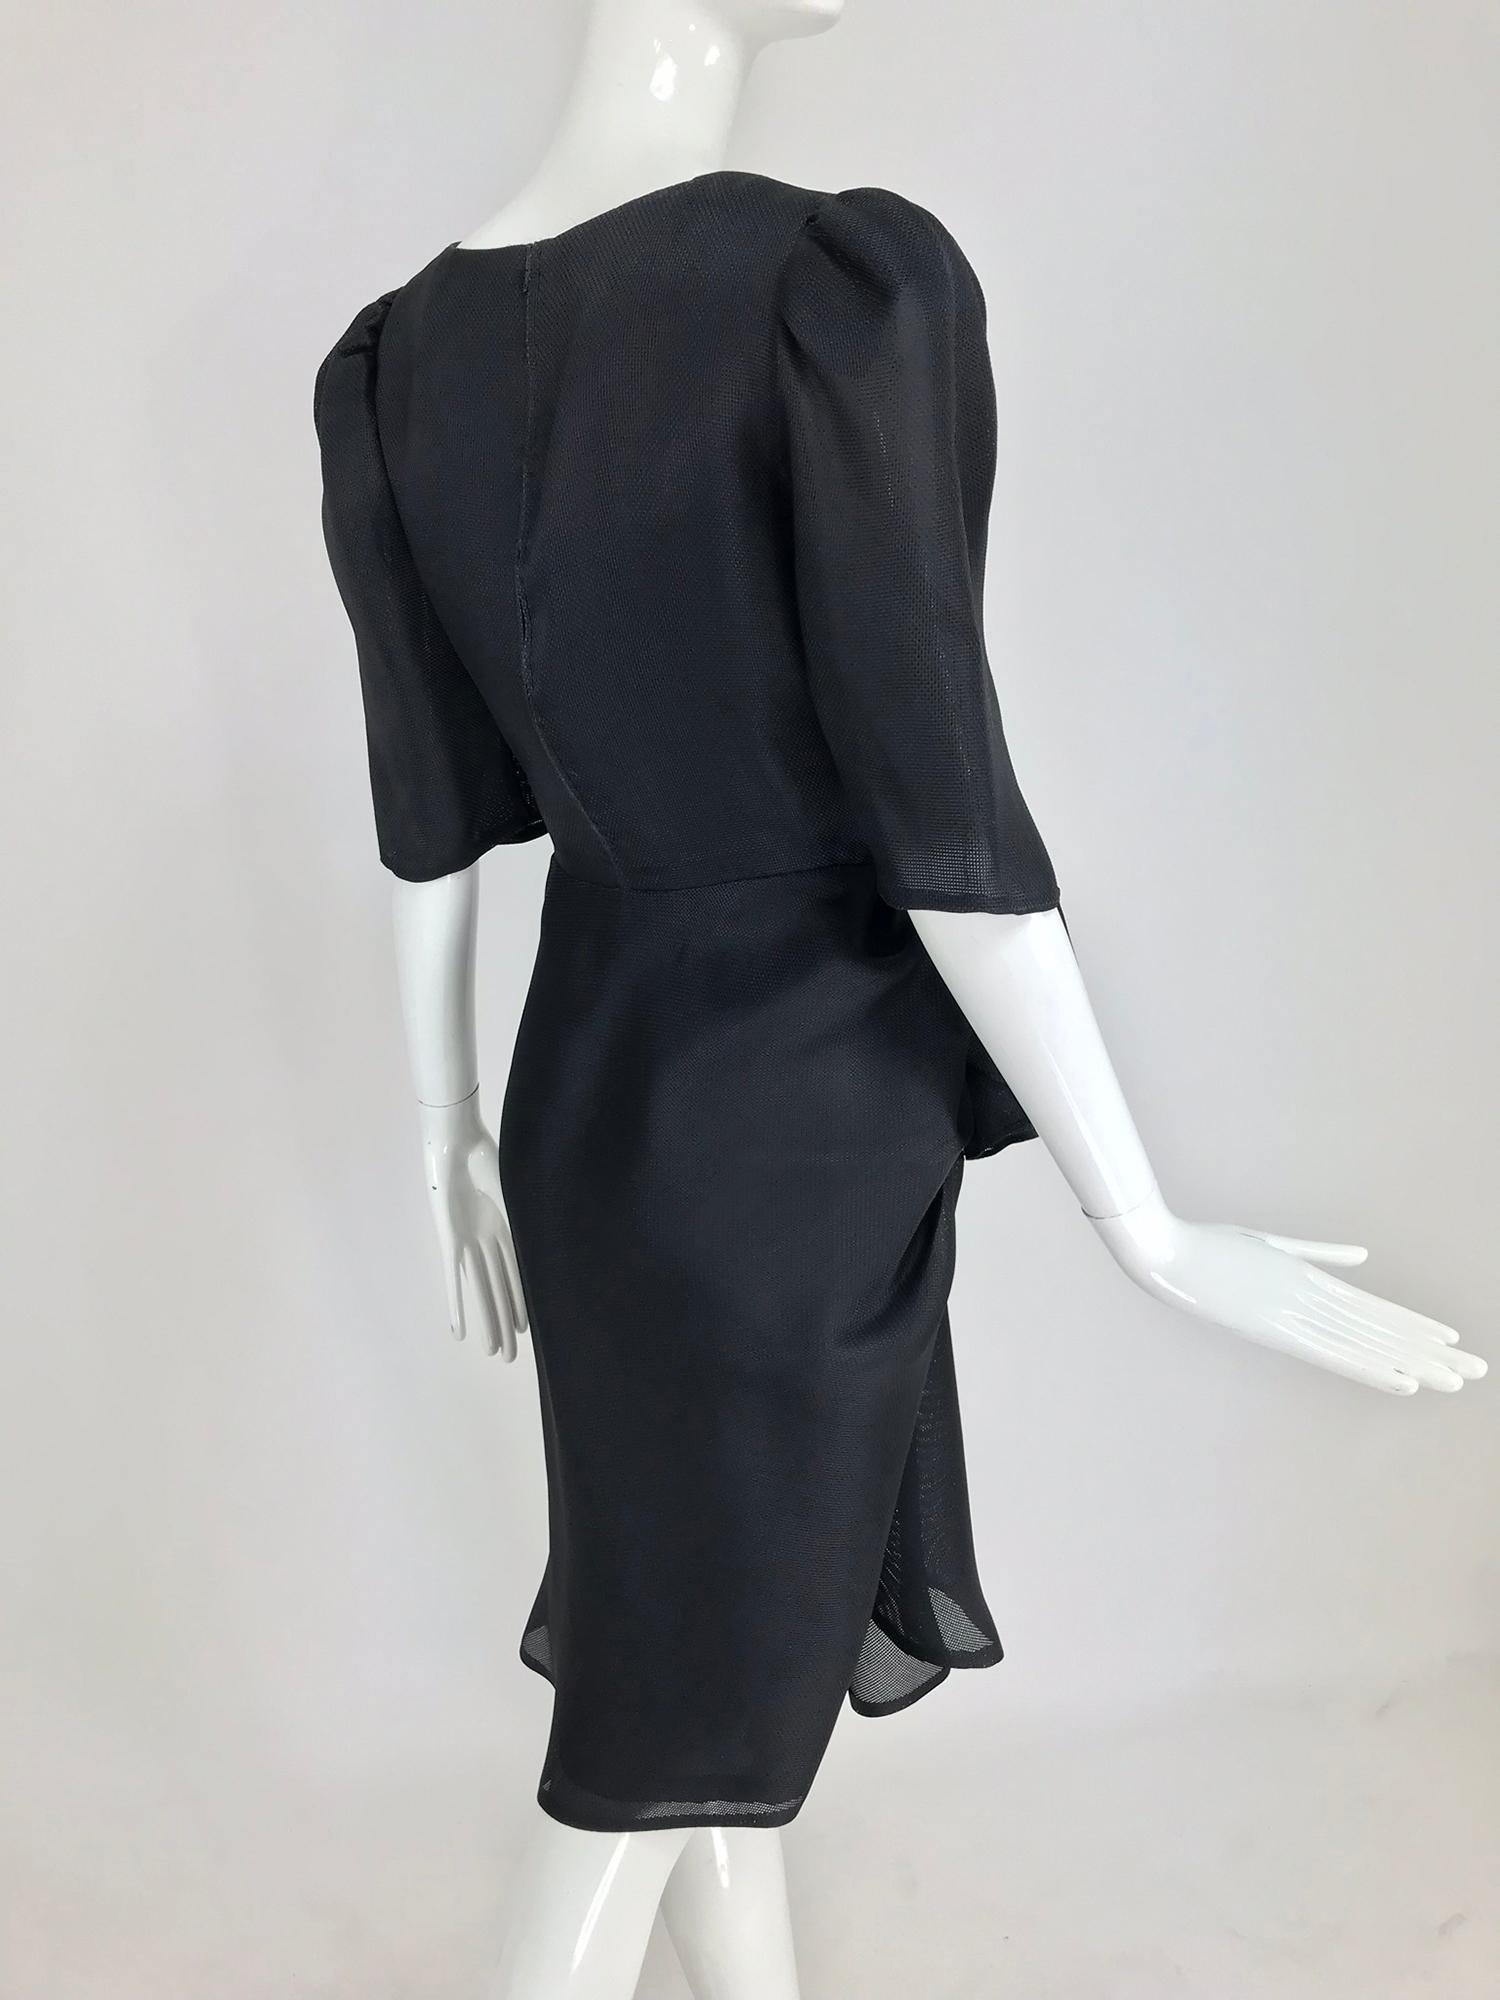 Givency Black Textured Silk Dress with Hip Bow 1990s For Sale 2